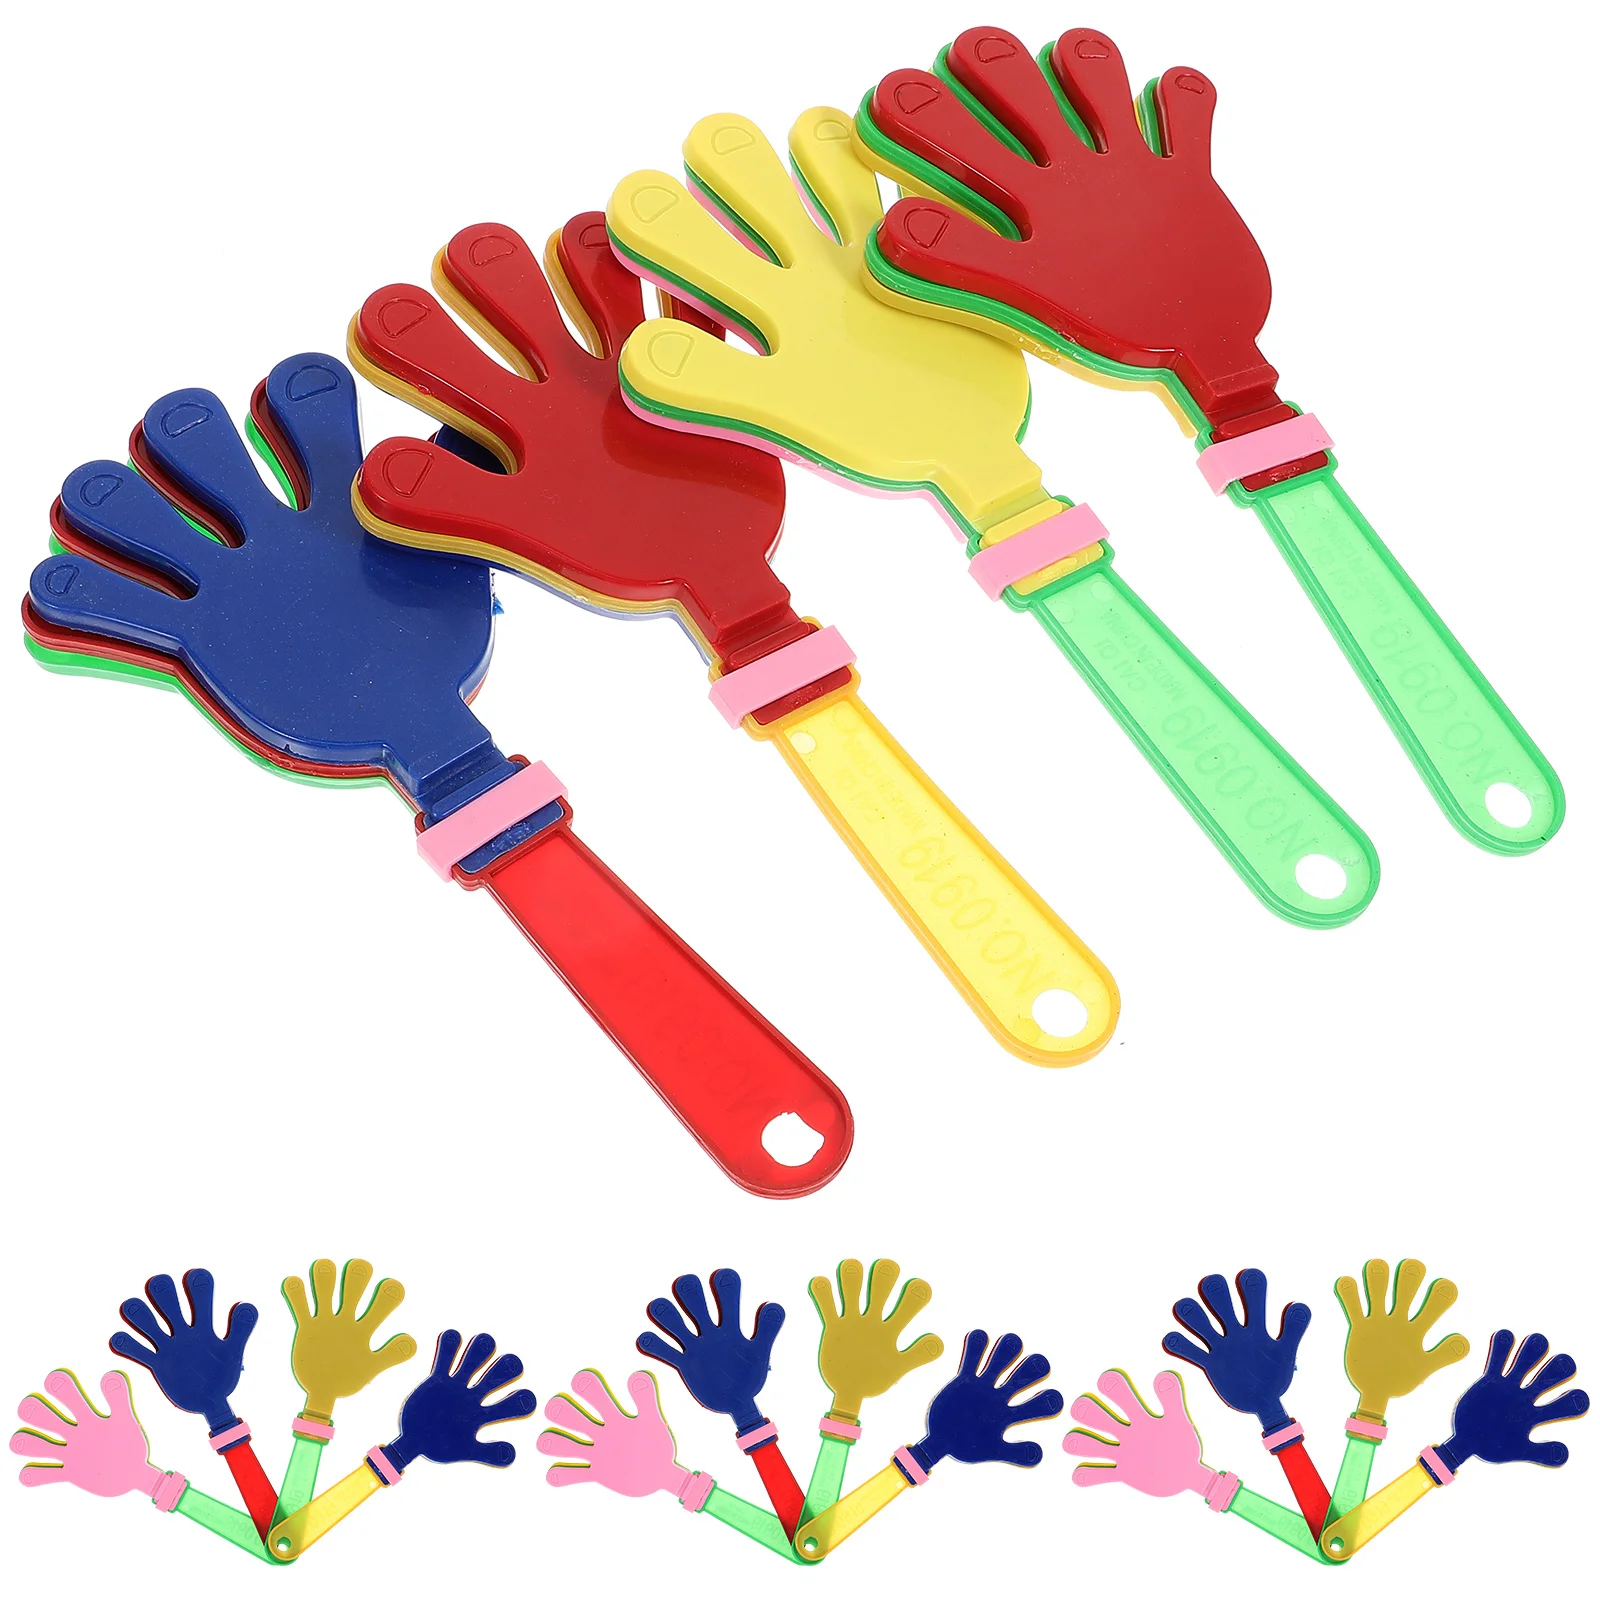 

Hand Clapper 20pcs, 73 x 33 inch Hand Clapper Noisemakers for Giving, Game Accessories,, Party Favor, Prizes and Supplies-